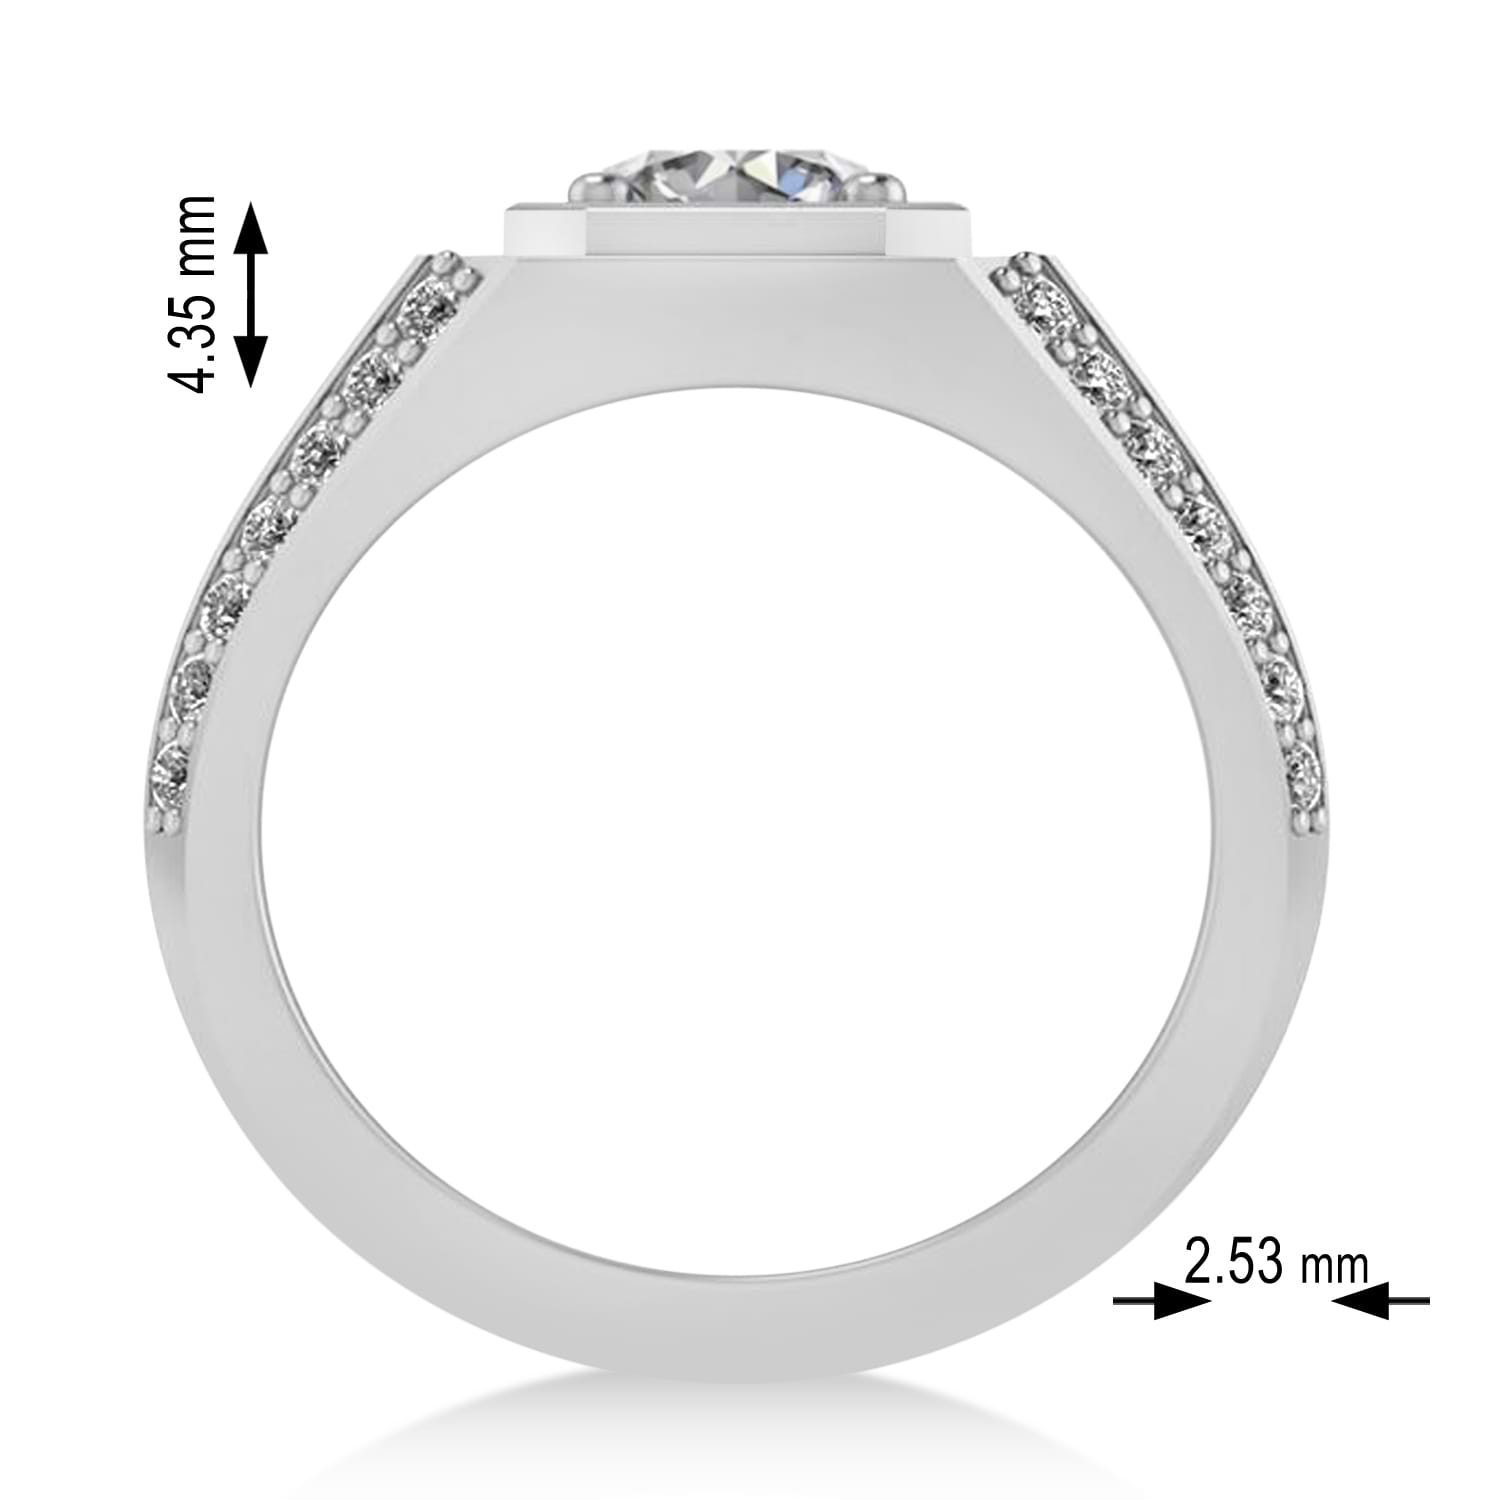 Lab Grown Diamond Accented Men's Engagement Ring 14k White Gold (2.06ct)